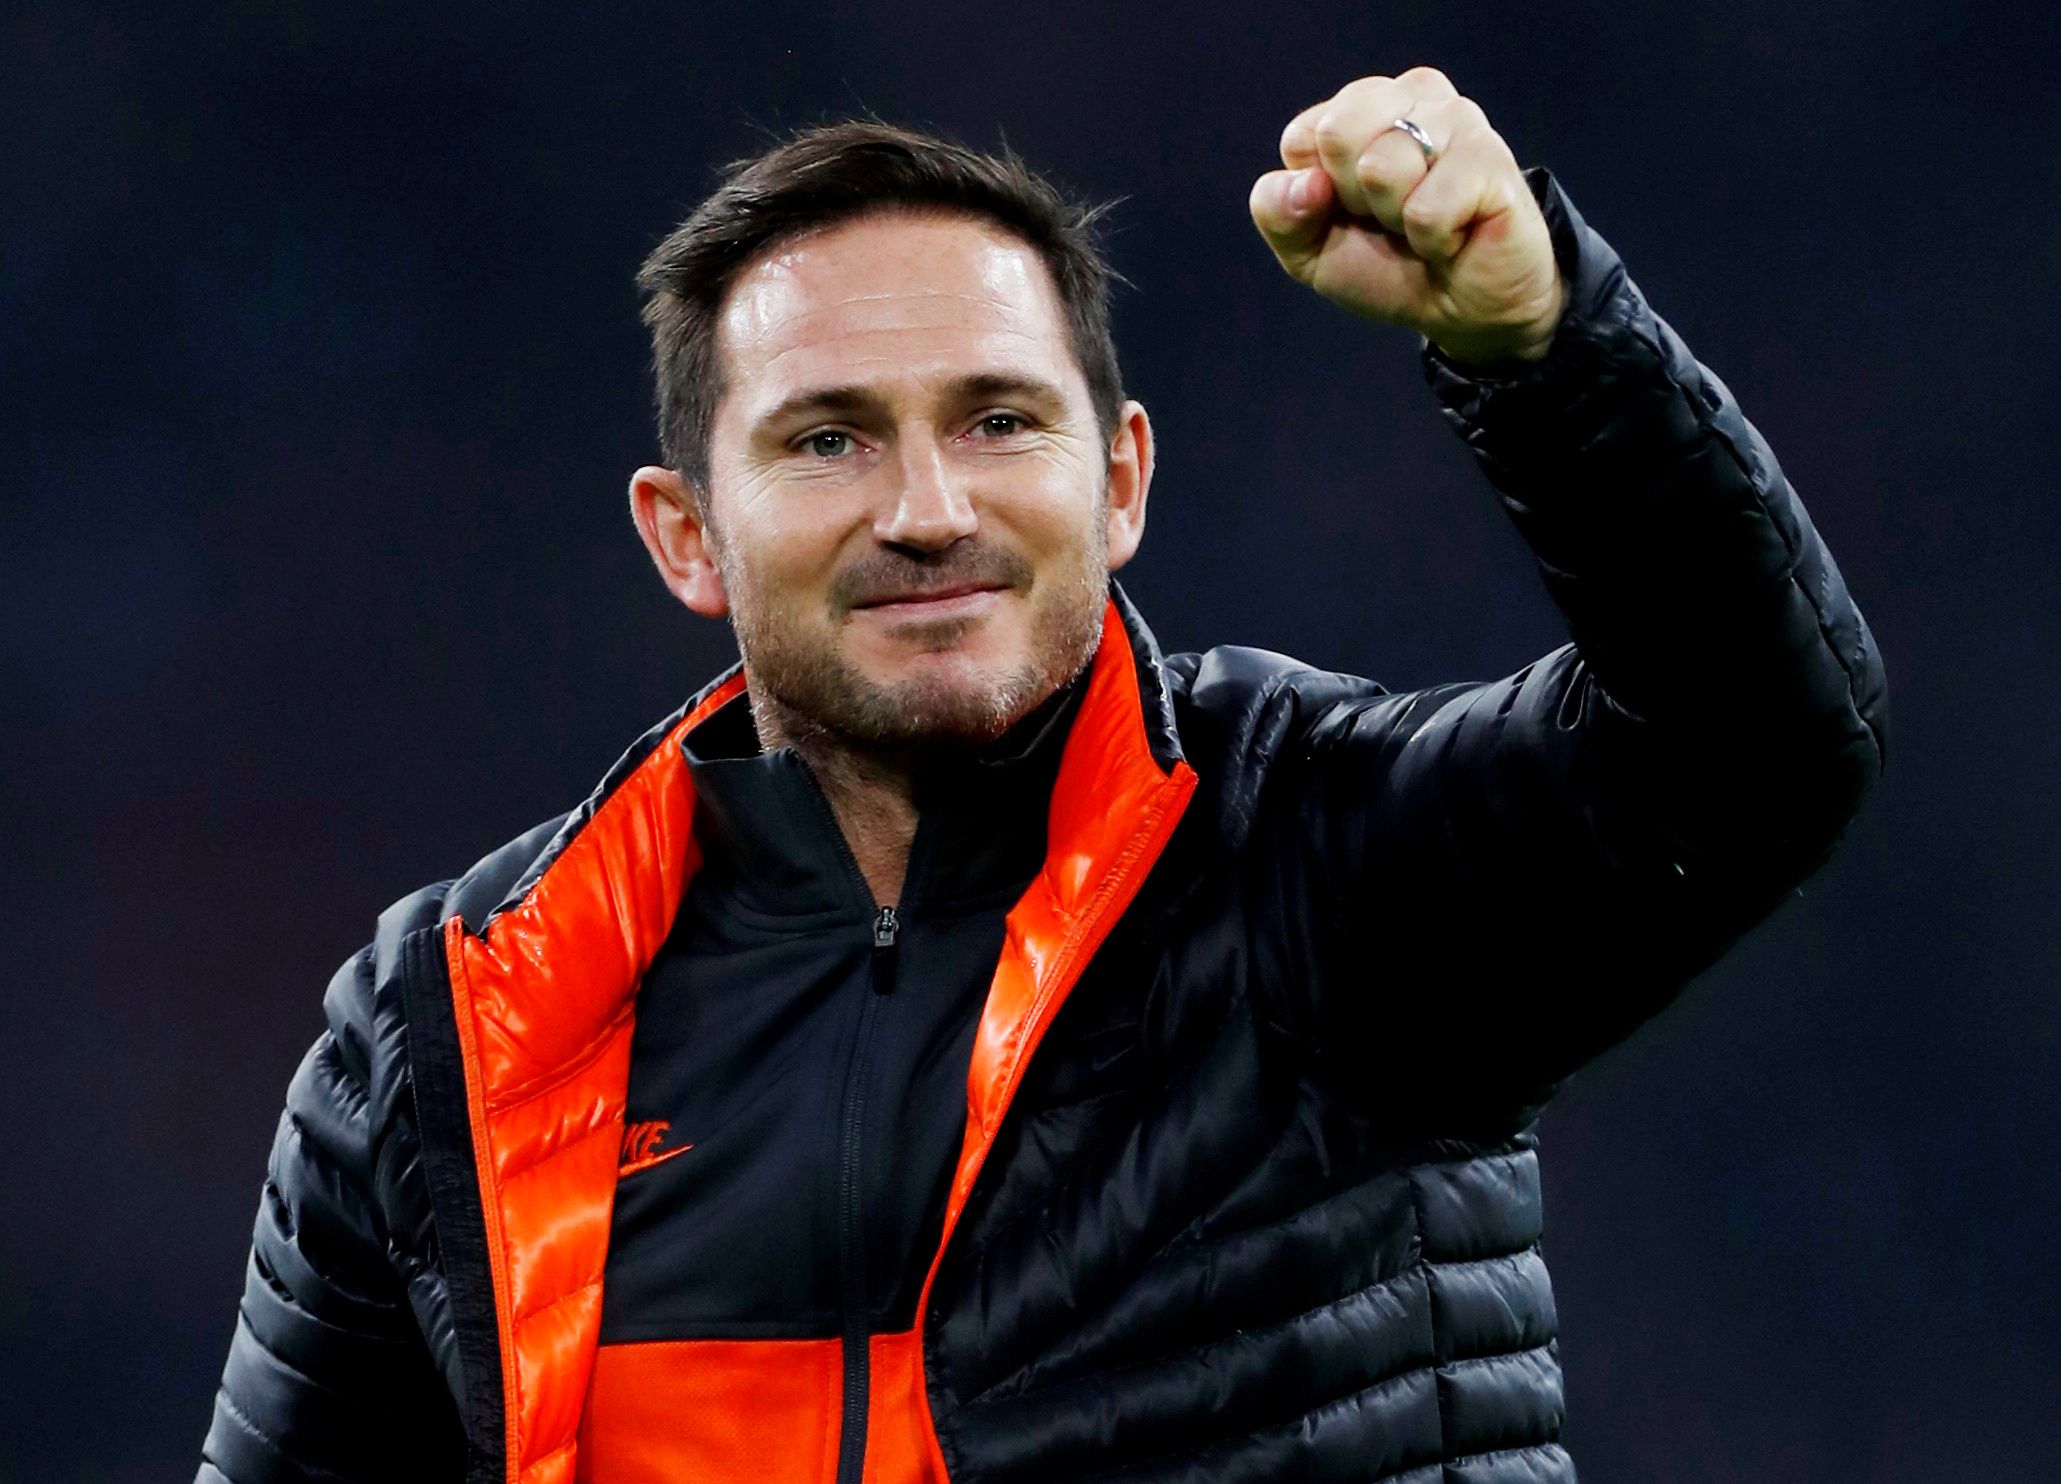 Soccer Football - Champions League - Group H - Ajax Amsterdam v Chelsea - Johan Cruijff Arena, Amsterdam, Netherlands - October 23, 2019     Chelsea manager Frank Lampard celebrates after the match   Action Images via Reuters/Lee Smith